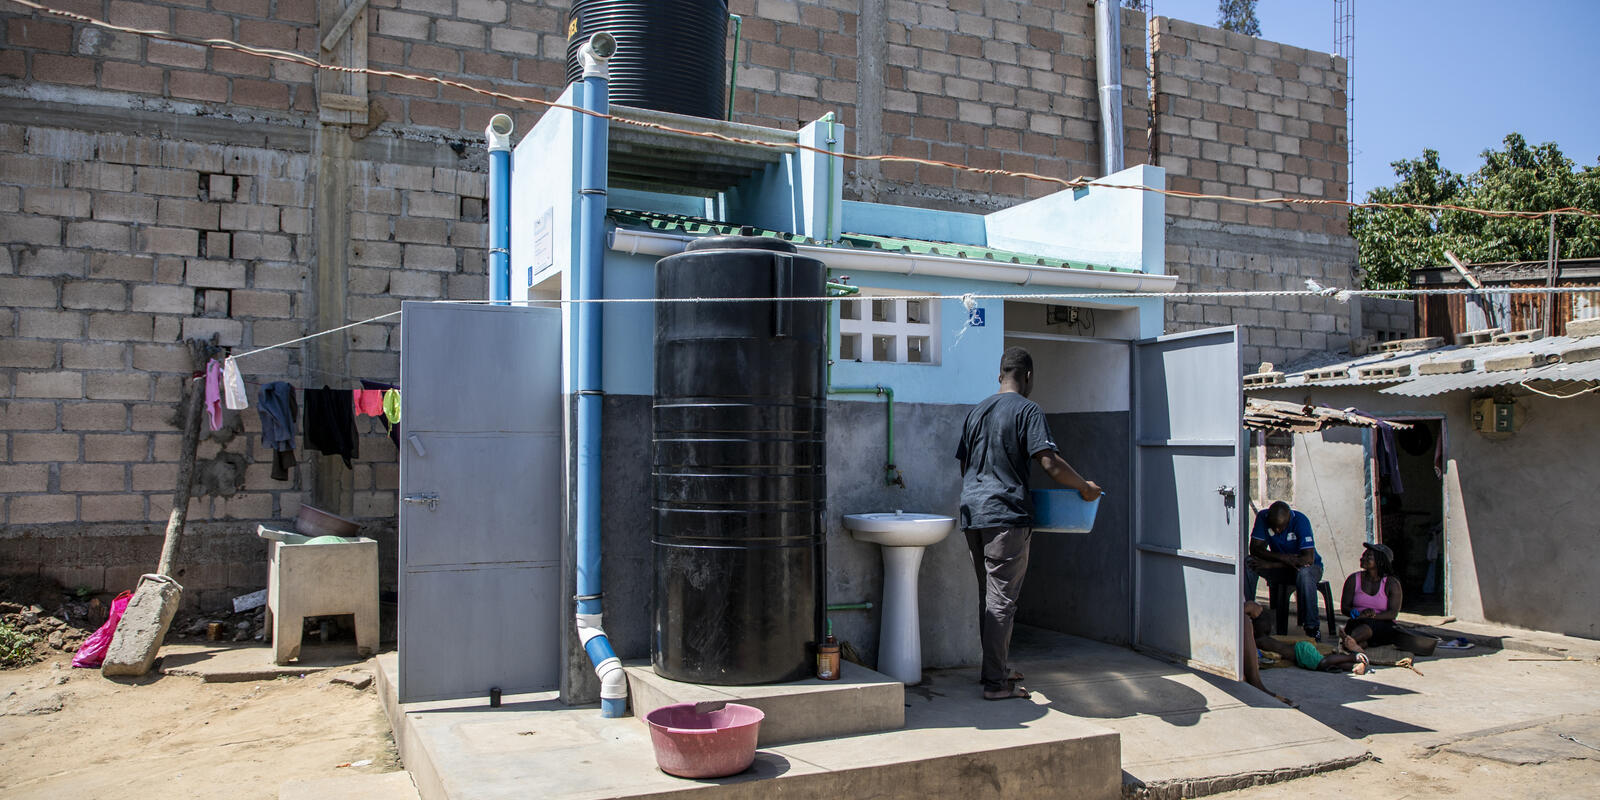 By deploying smart, innovative financing to activate sanitation economies, we can deliver essential services, and important social and economic benefits, to people and communities. Photograph: Jason Florio/SHF archives©